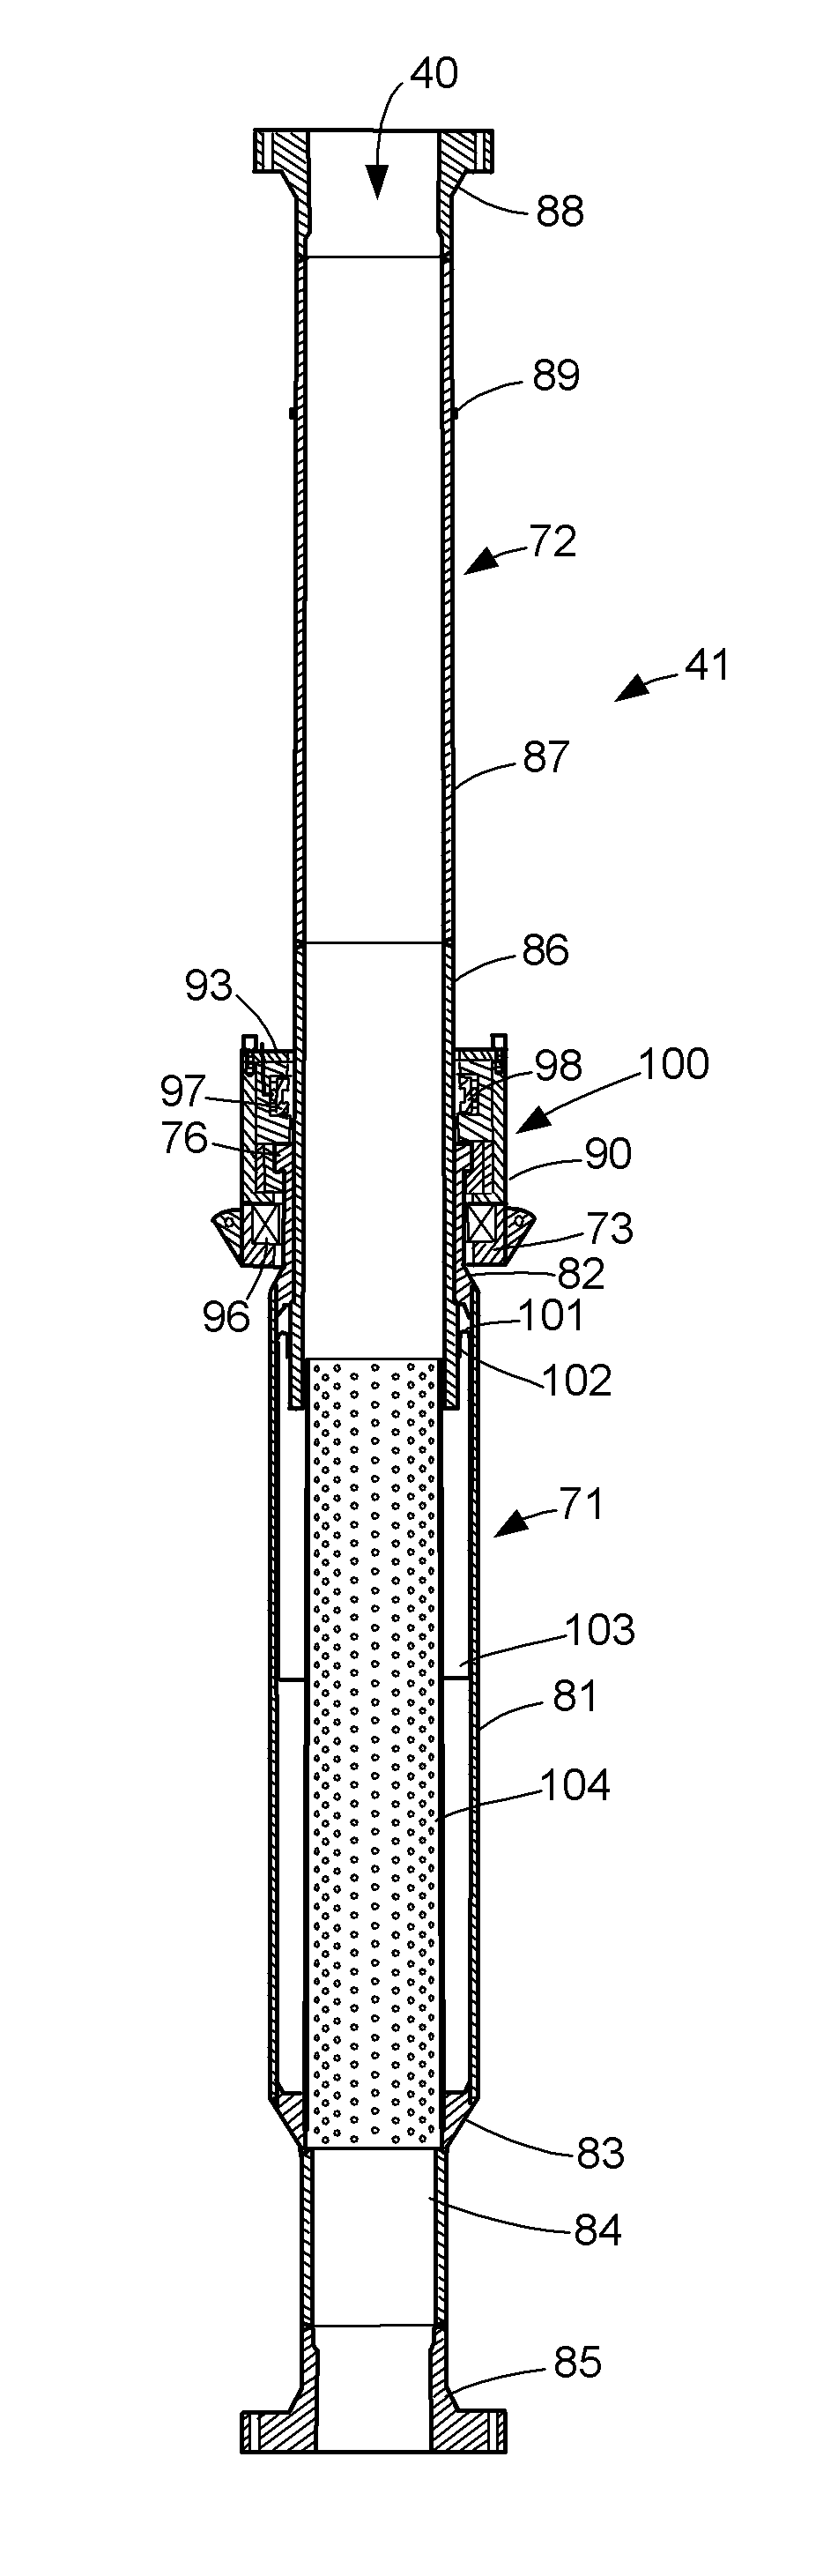 Elastomeric Sleeve-Enabled Telescopic Joint for a Marine Drilling Riser